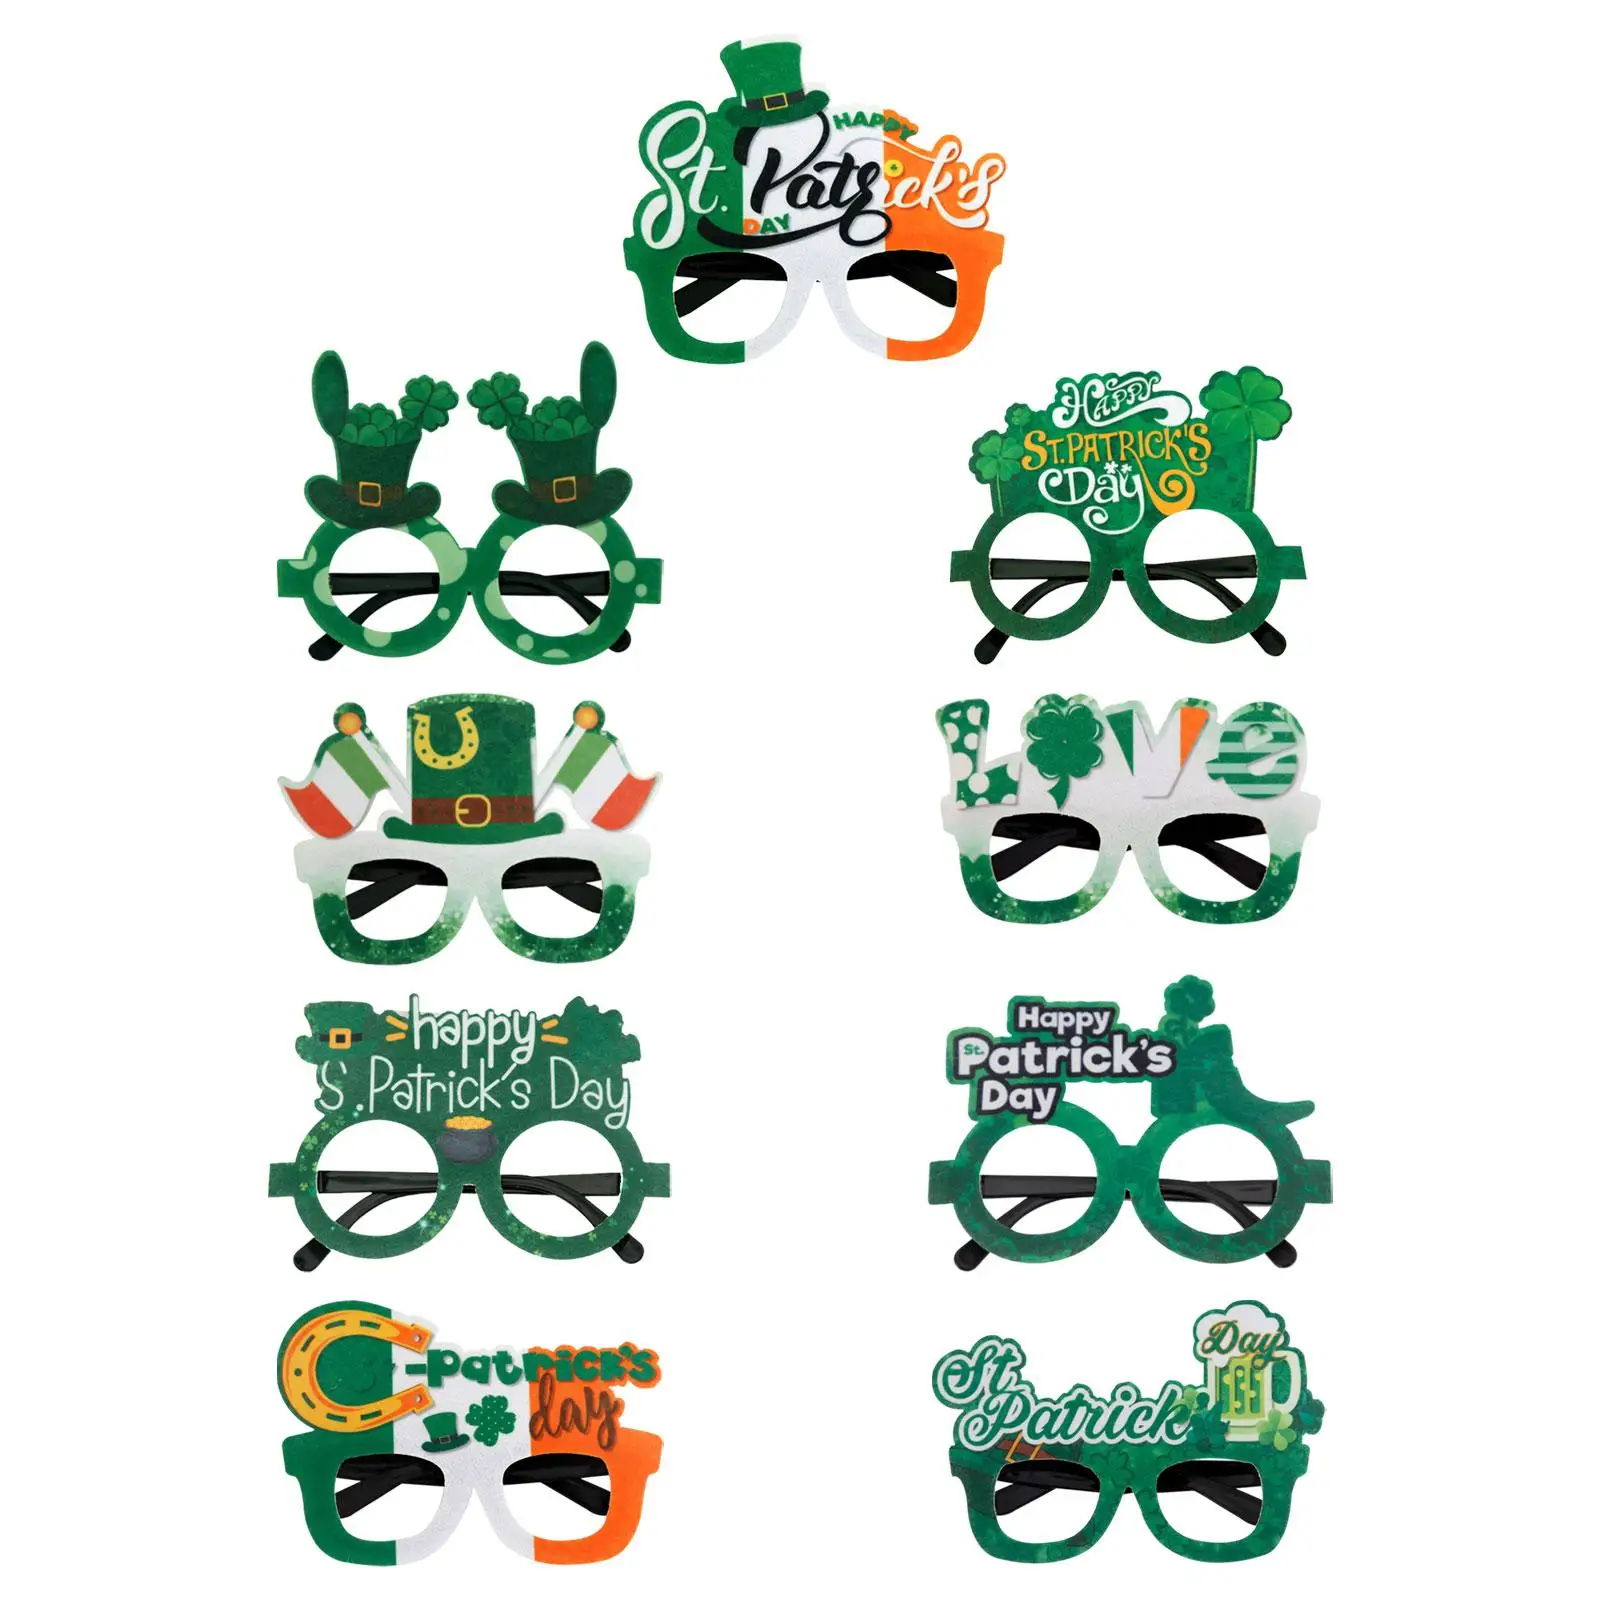 Happy ST Patricks Day Glasses Shamrock Decor Glasses Frame Hat Fancy Dress Eyeglasses for Football Party Favors Rugby Adults